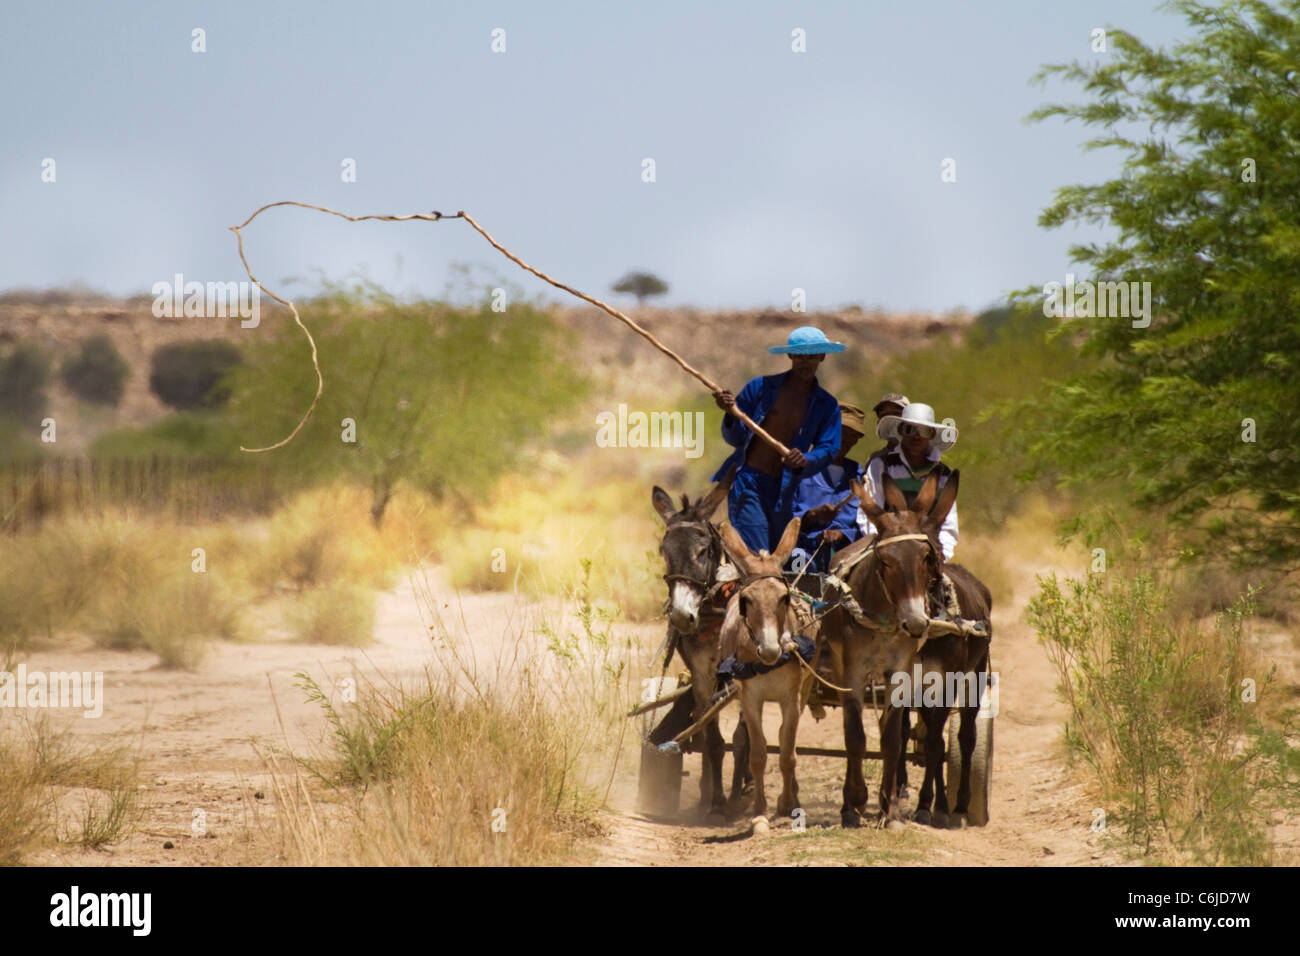 Donkey cart in the Kalahari with a man wielding a whip to urge the donkeys forwards Stock Photo